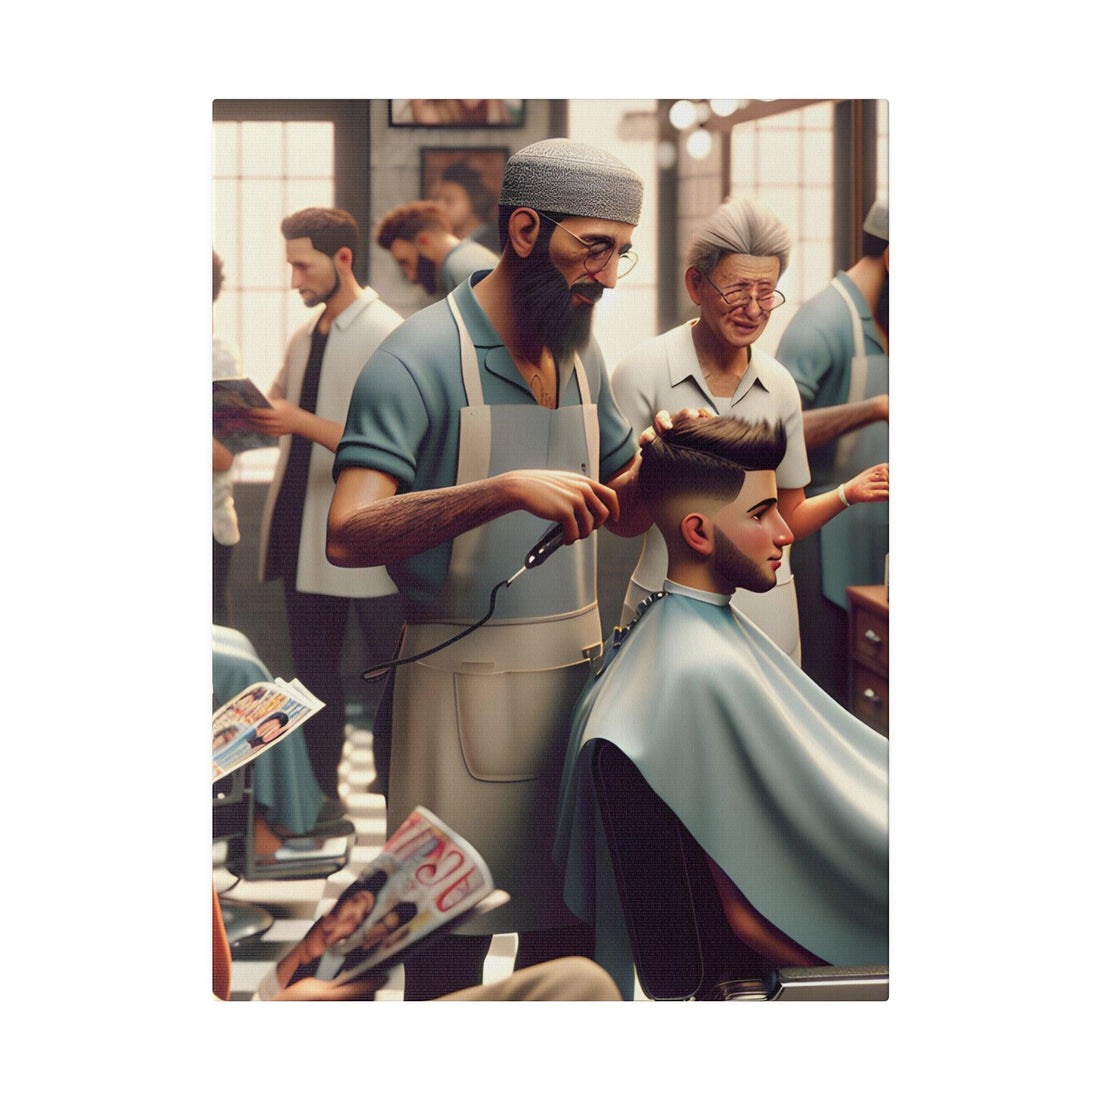 "Cutting Edge Charm: Barber Shop Canvas Wall Art Collection" - The Alice Gallery